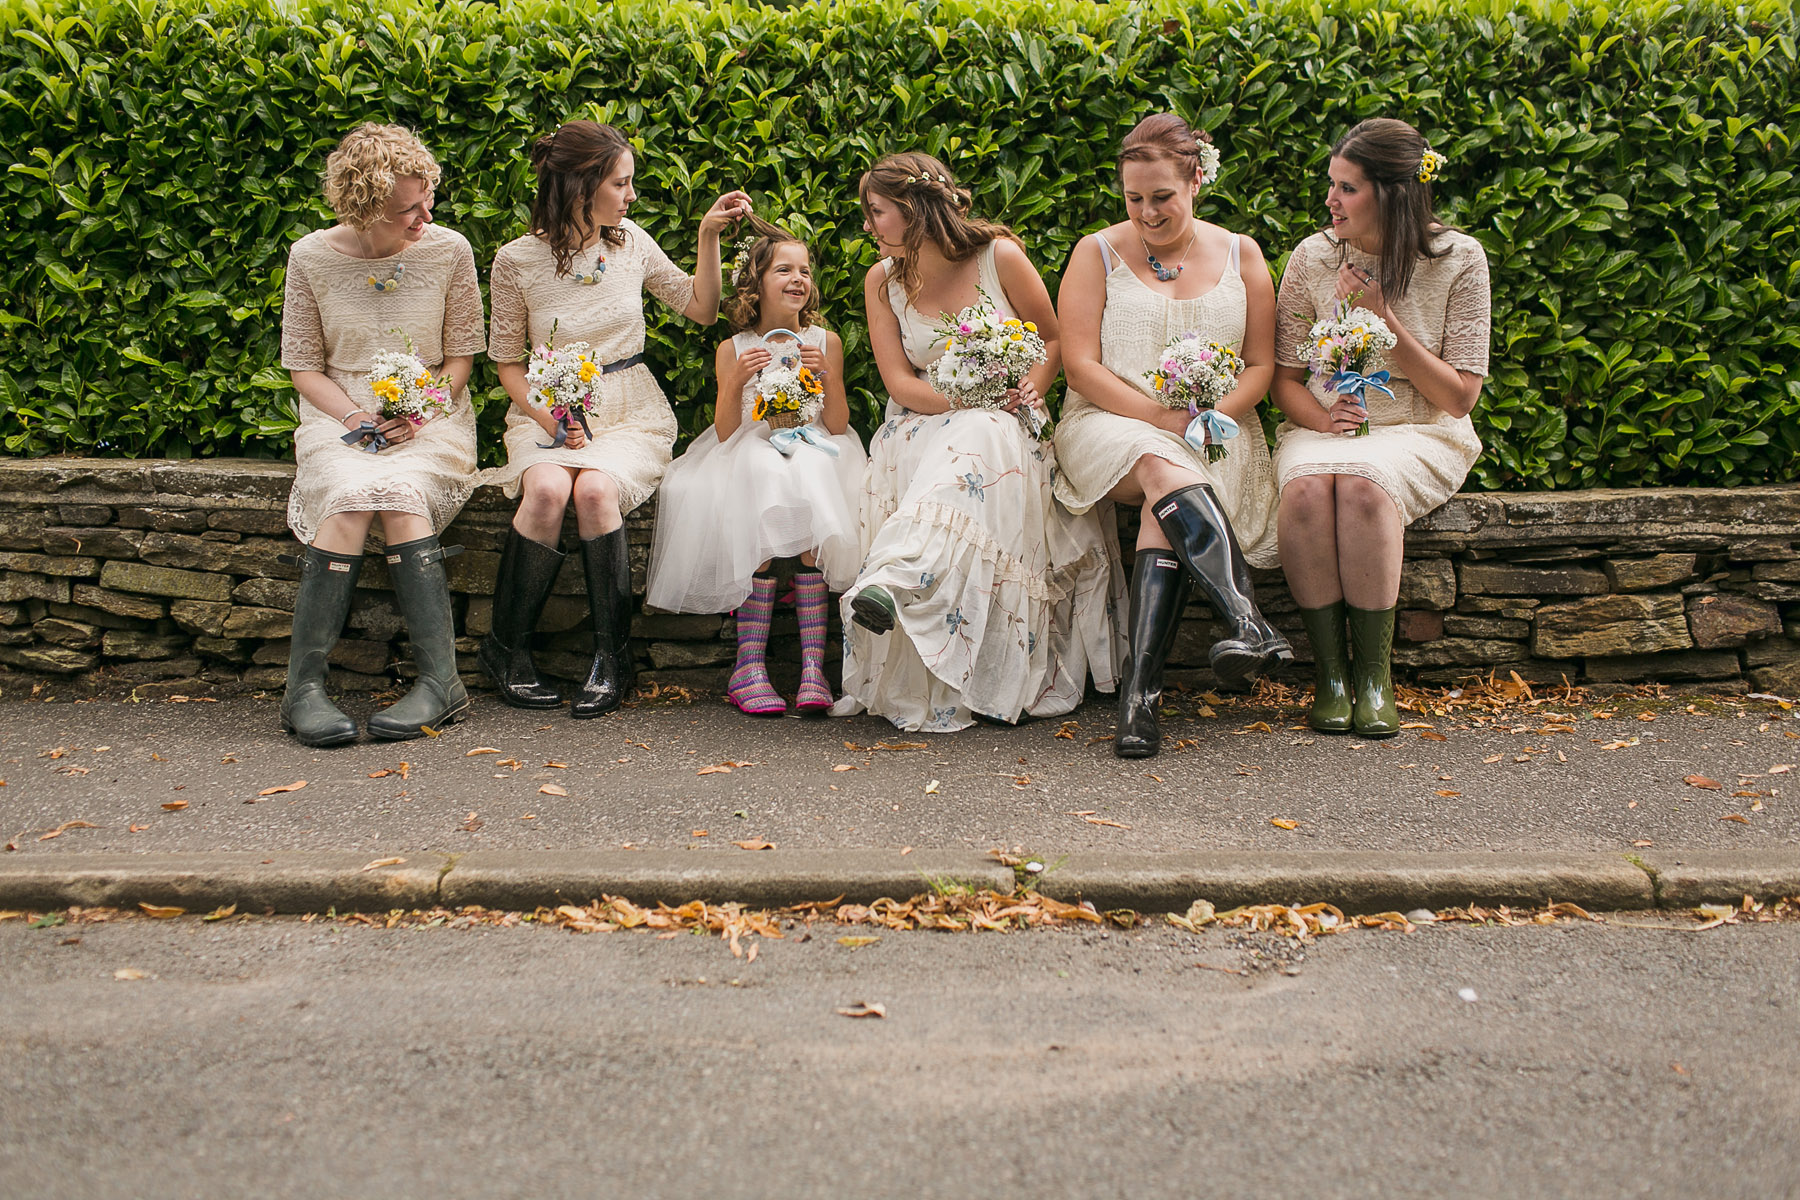 Abi and Dave's quaint and rustic Village hall Humanist wedding with a Handfasting at Cawthorne Village Hall.